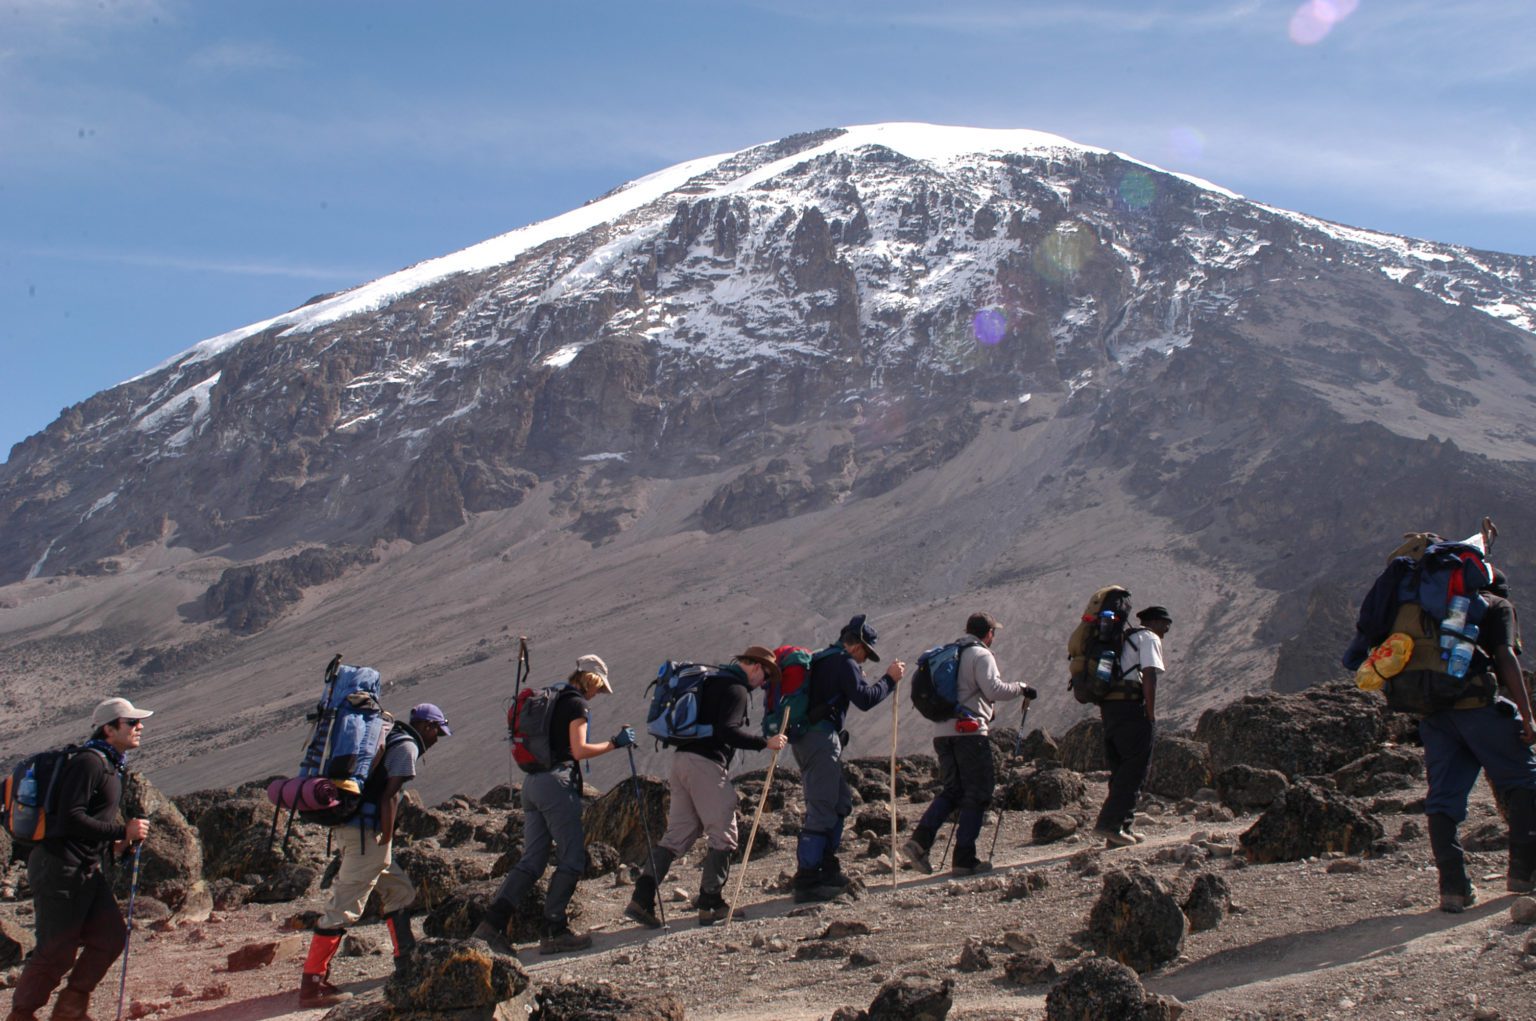 row of hikers with backpacks and walking sticks following the trail on Kilimanjaro with the snow-capped peak in the distance